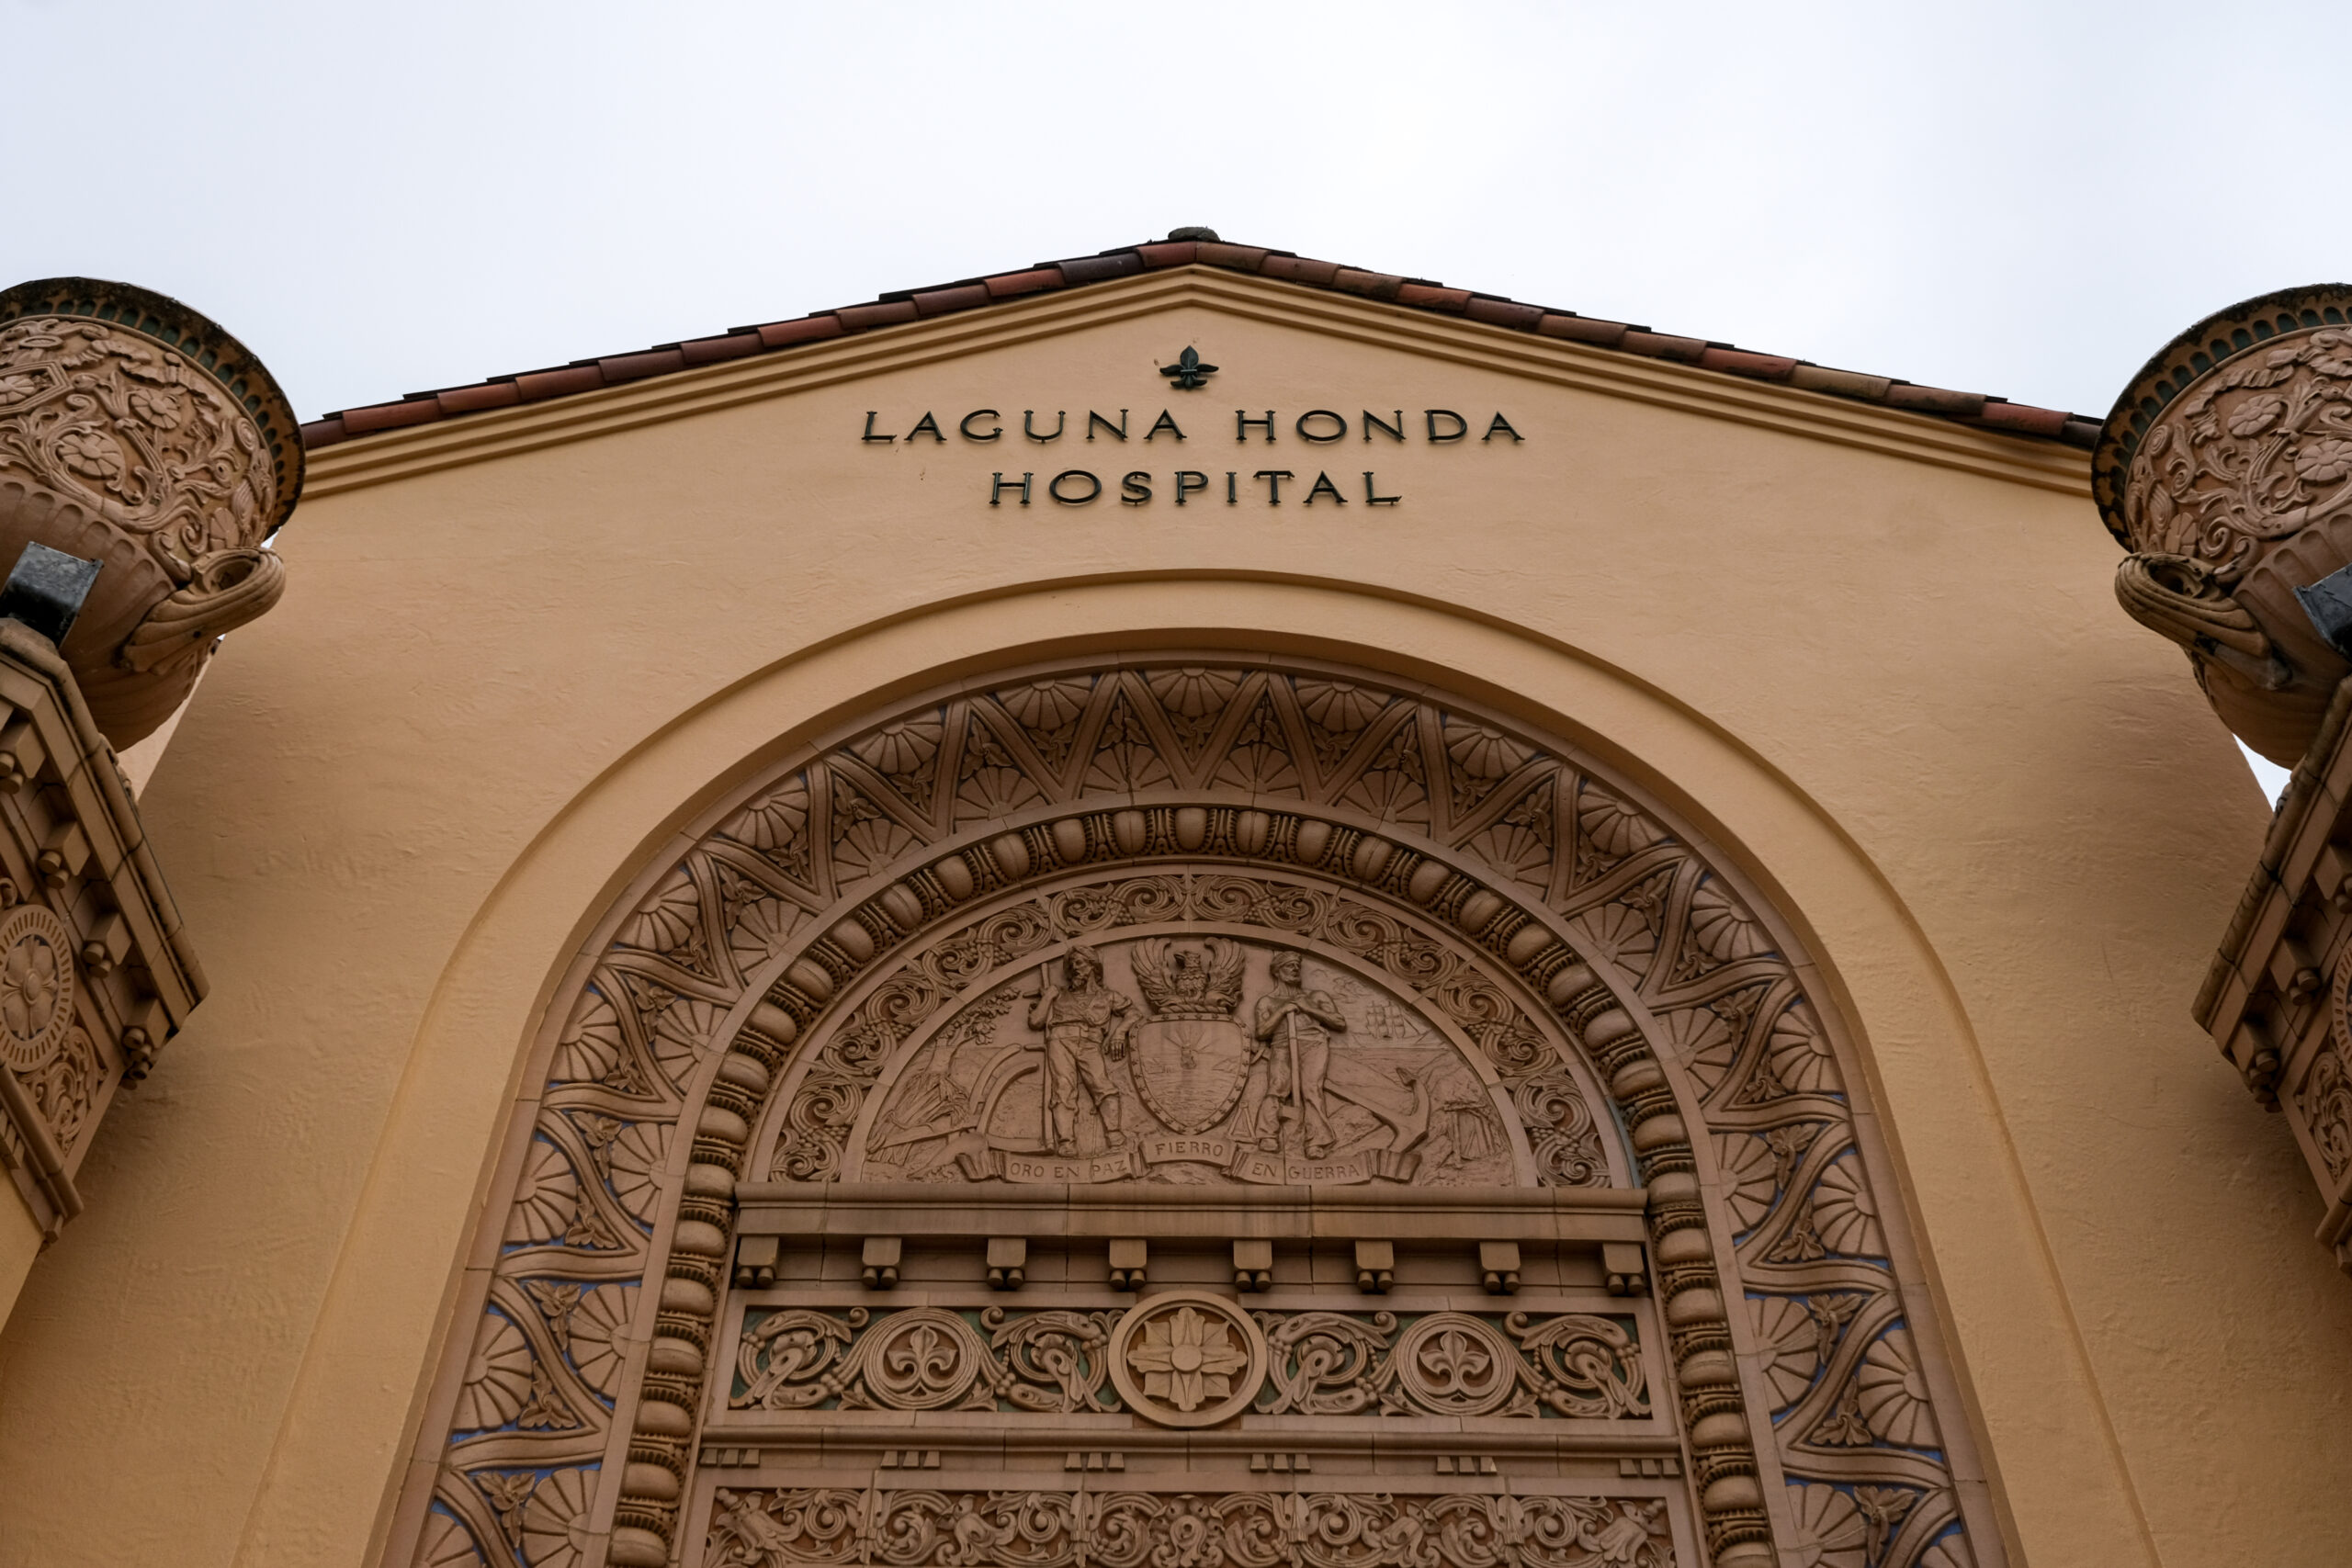 Exterior of Laguna Honda Hospital and courtyard in San Francisco, Calif. on May 16, 2022. | Camille Cohen